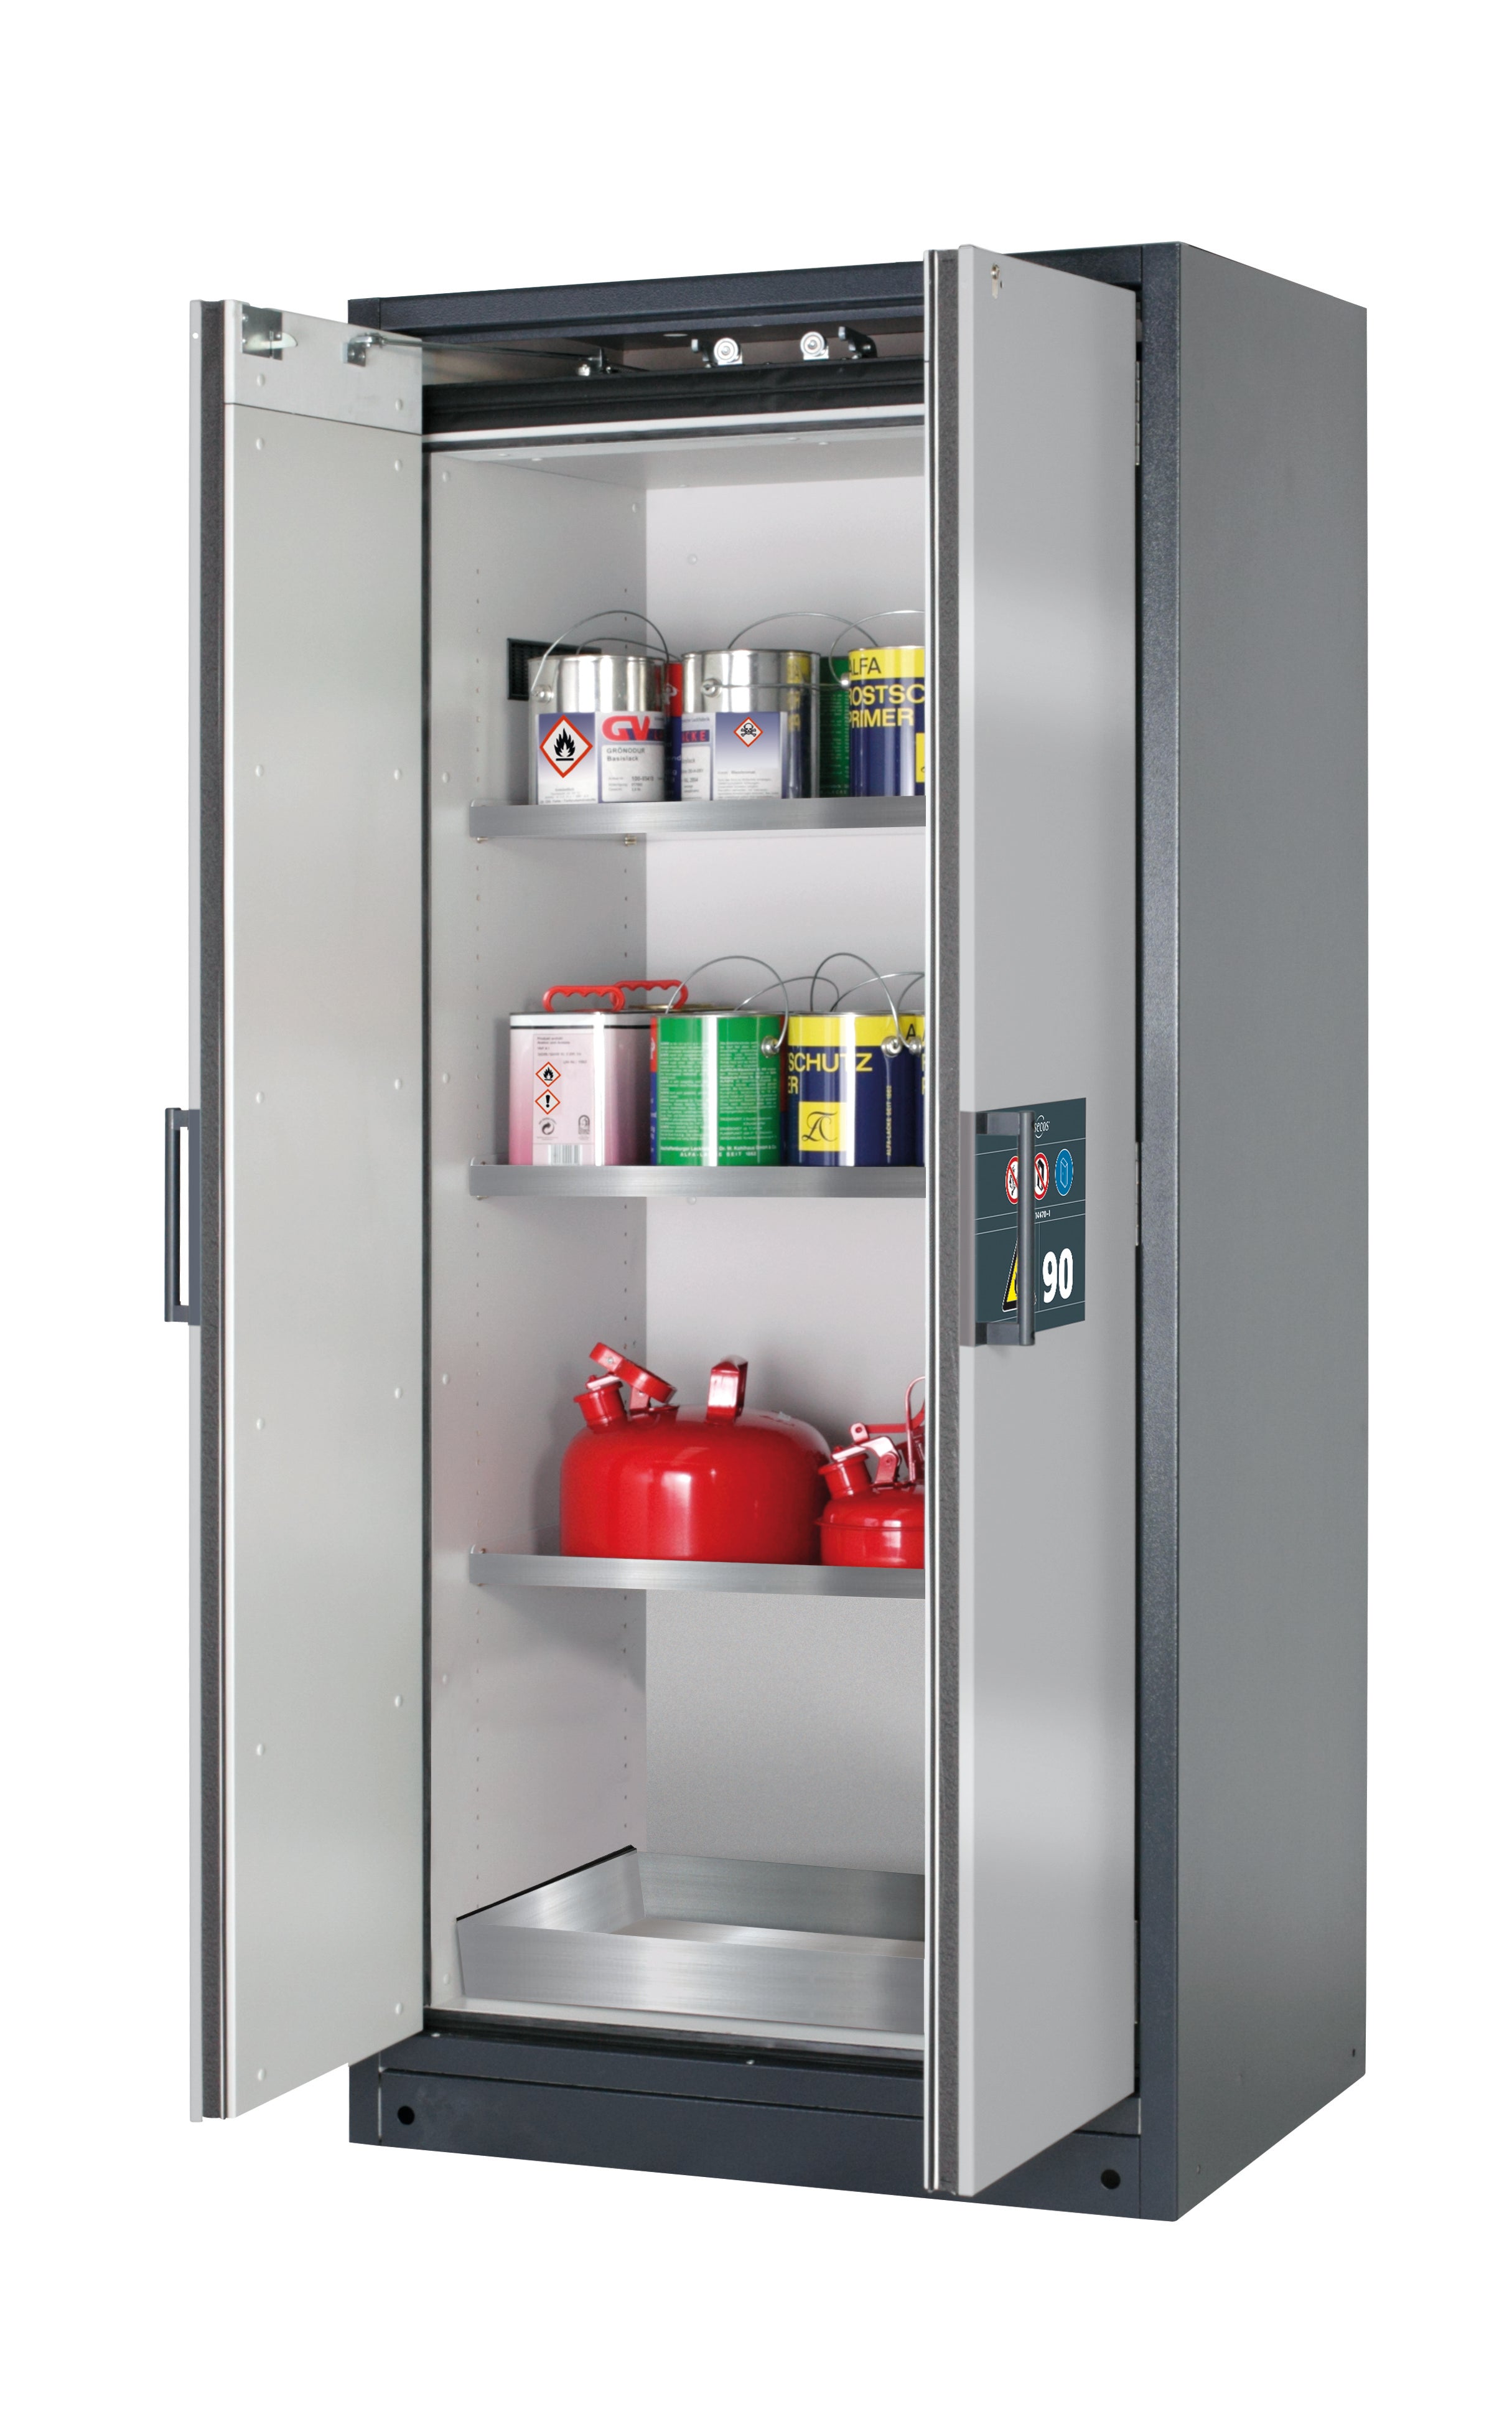 Type 90 safety storage cabinet Q-CLASSIC-90 model Q90.195.090 in asecos silver with 3x shelf standard (stainless steel 1.4301),